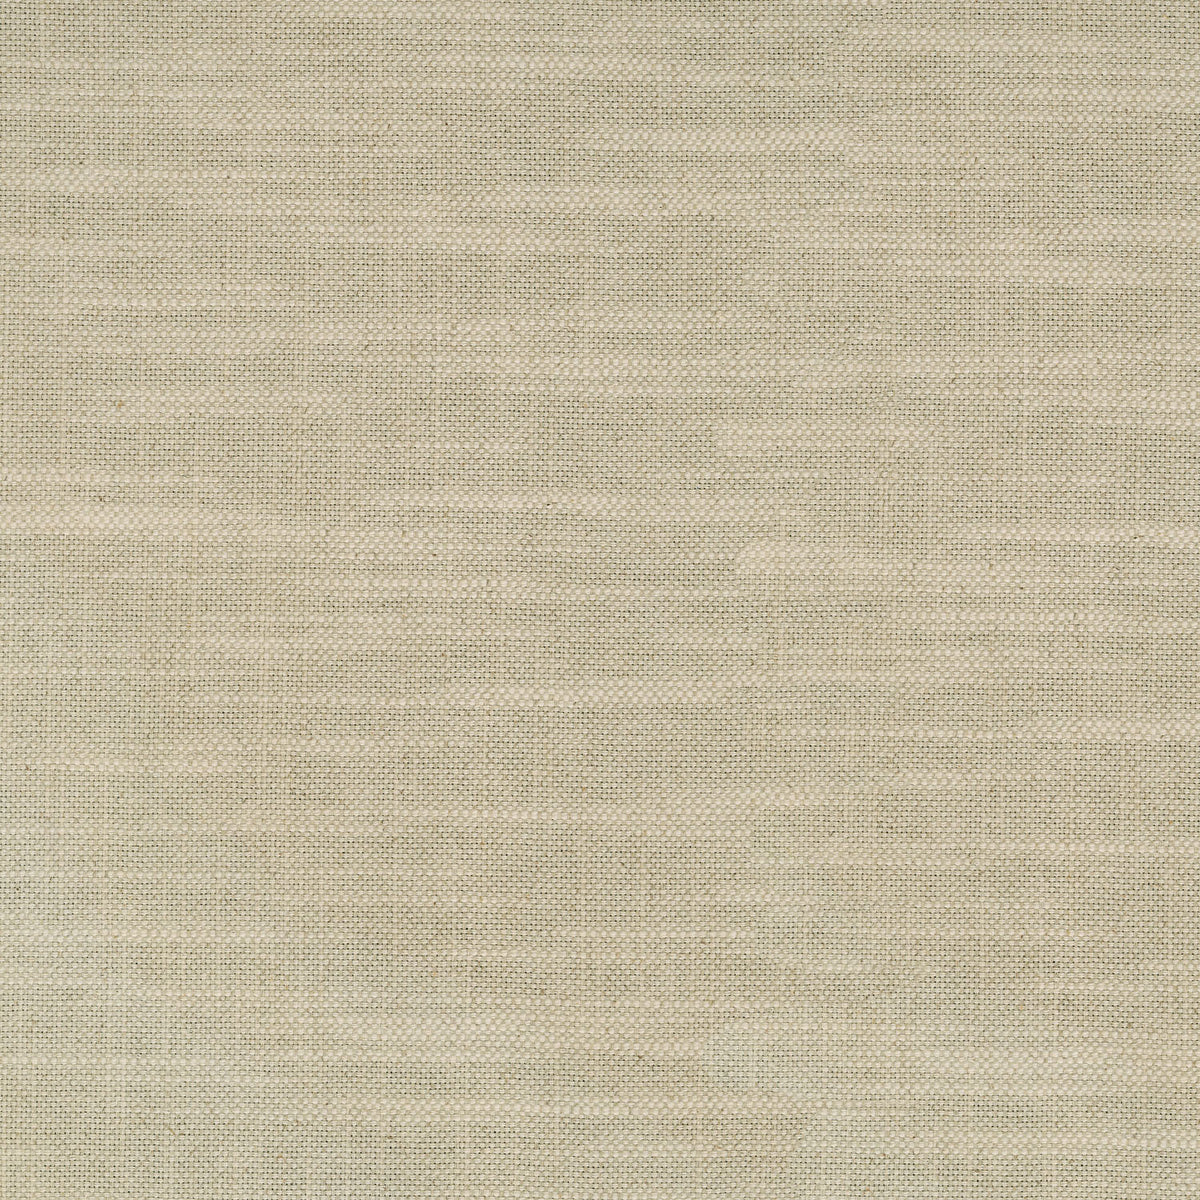 P/K Lifestyles Desmond Solid - Natural 409371 Upholstery Fabric